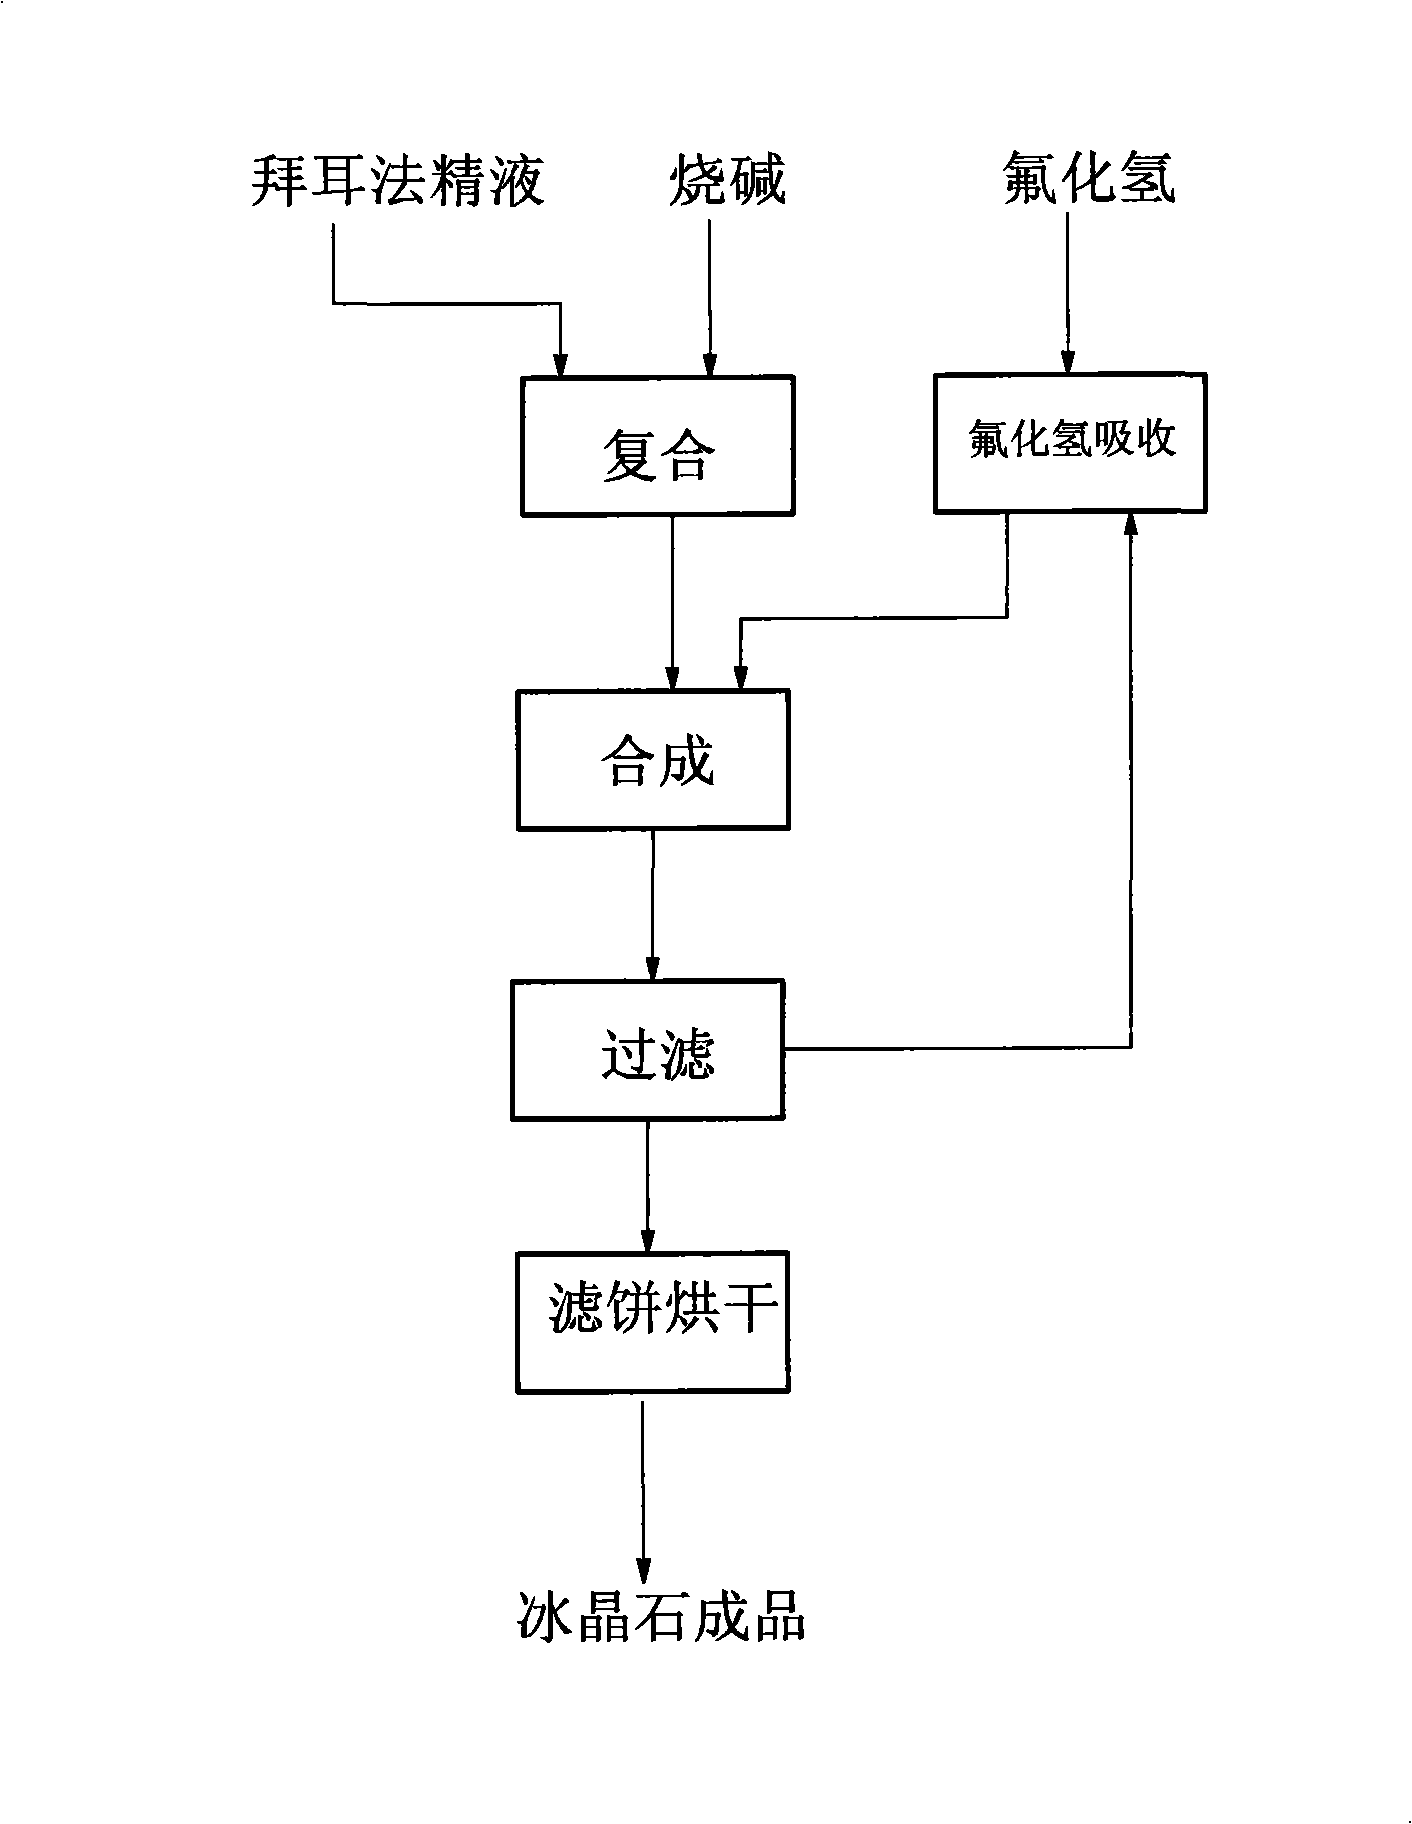 Method for producing ultra-fine cryolite